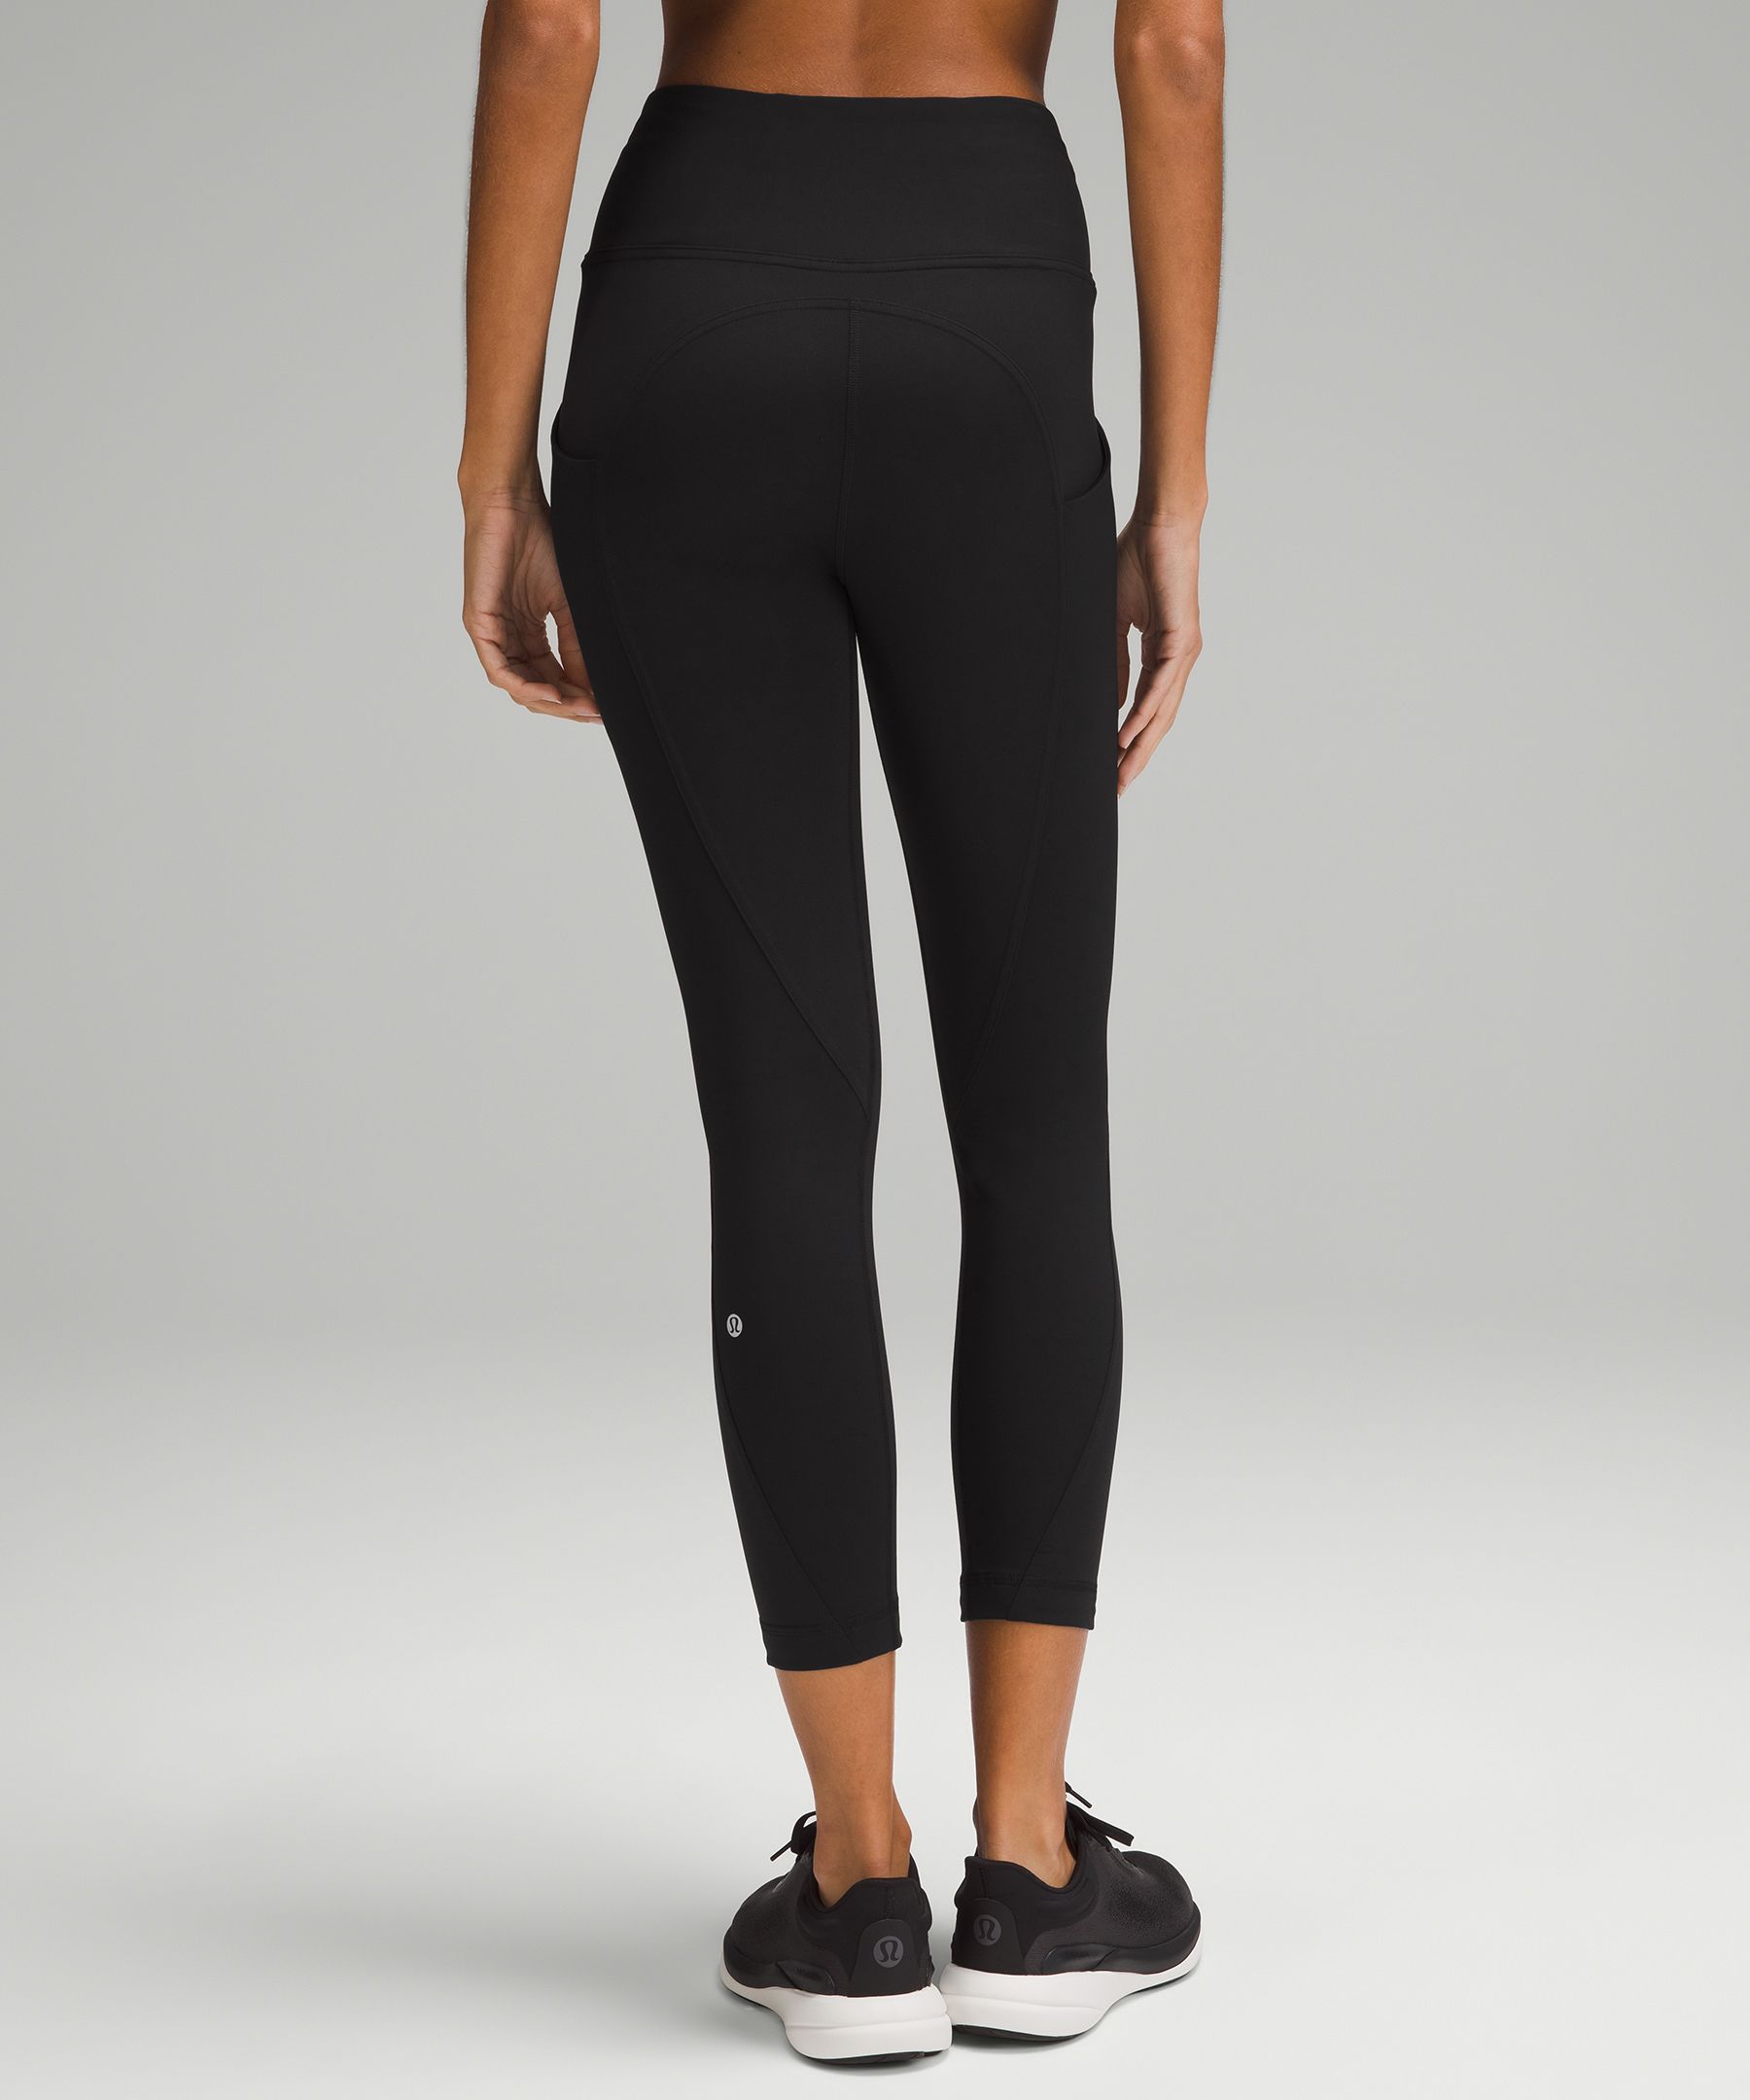 lululemon x Forster Rohner: Leggings You'll Want To Live In